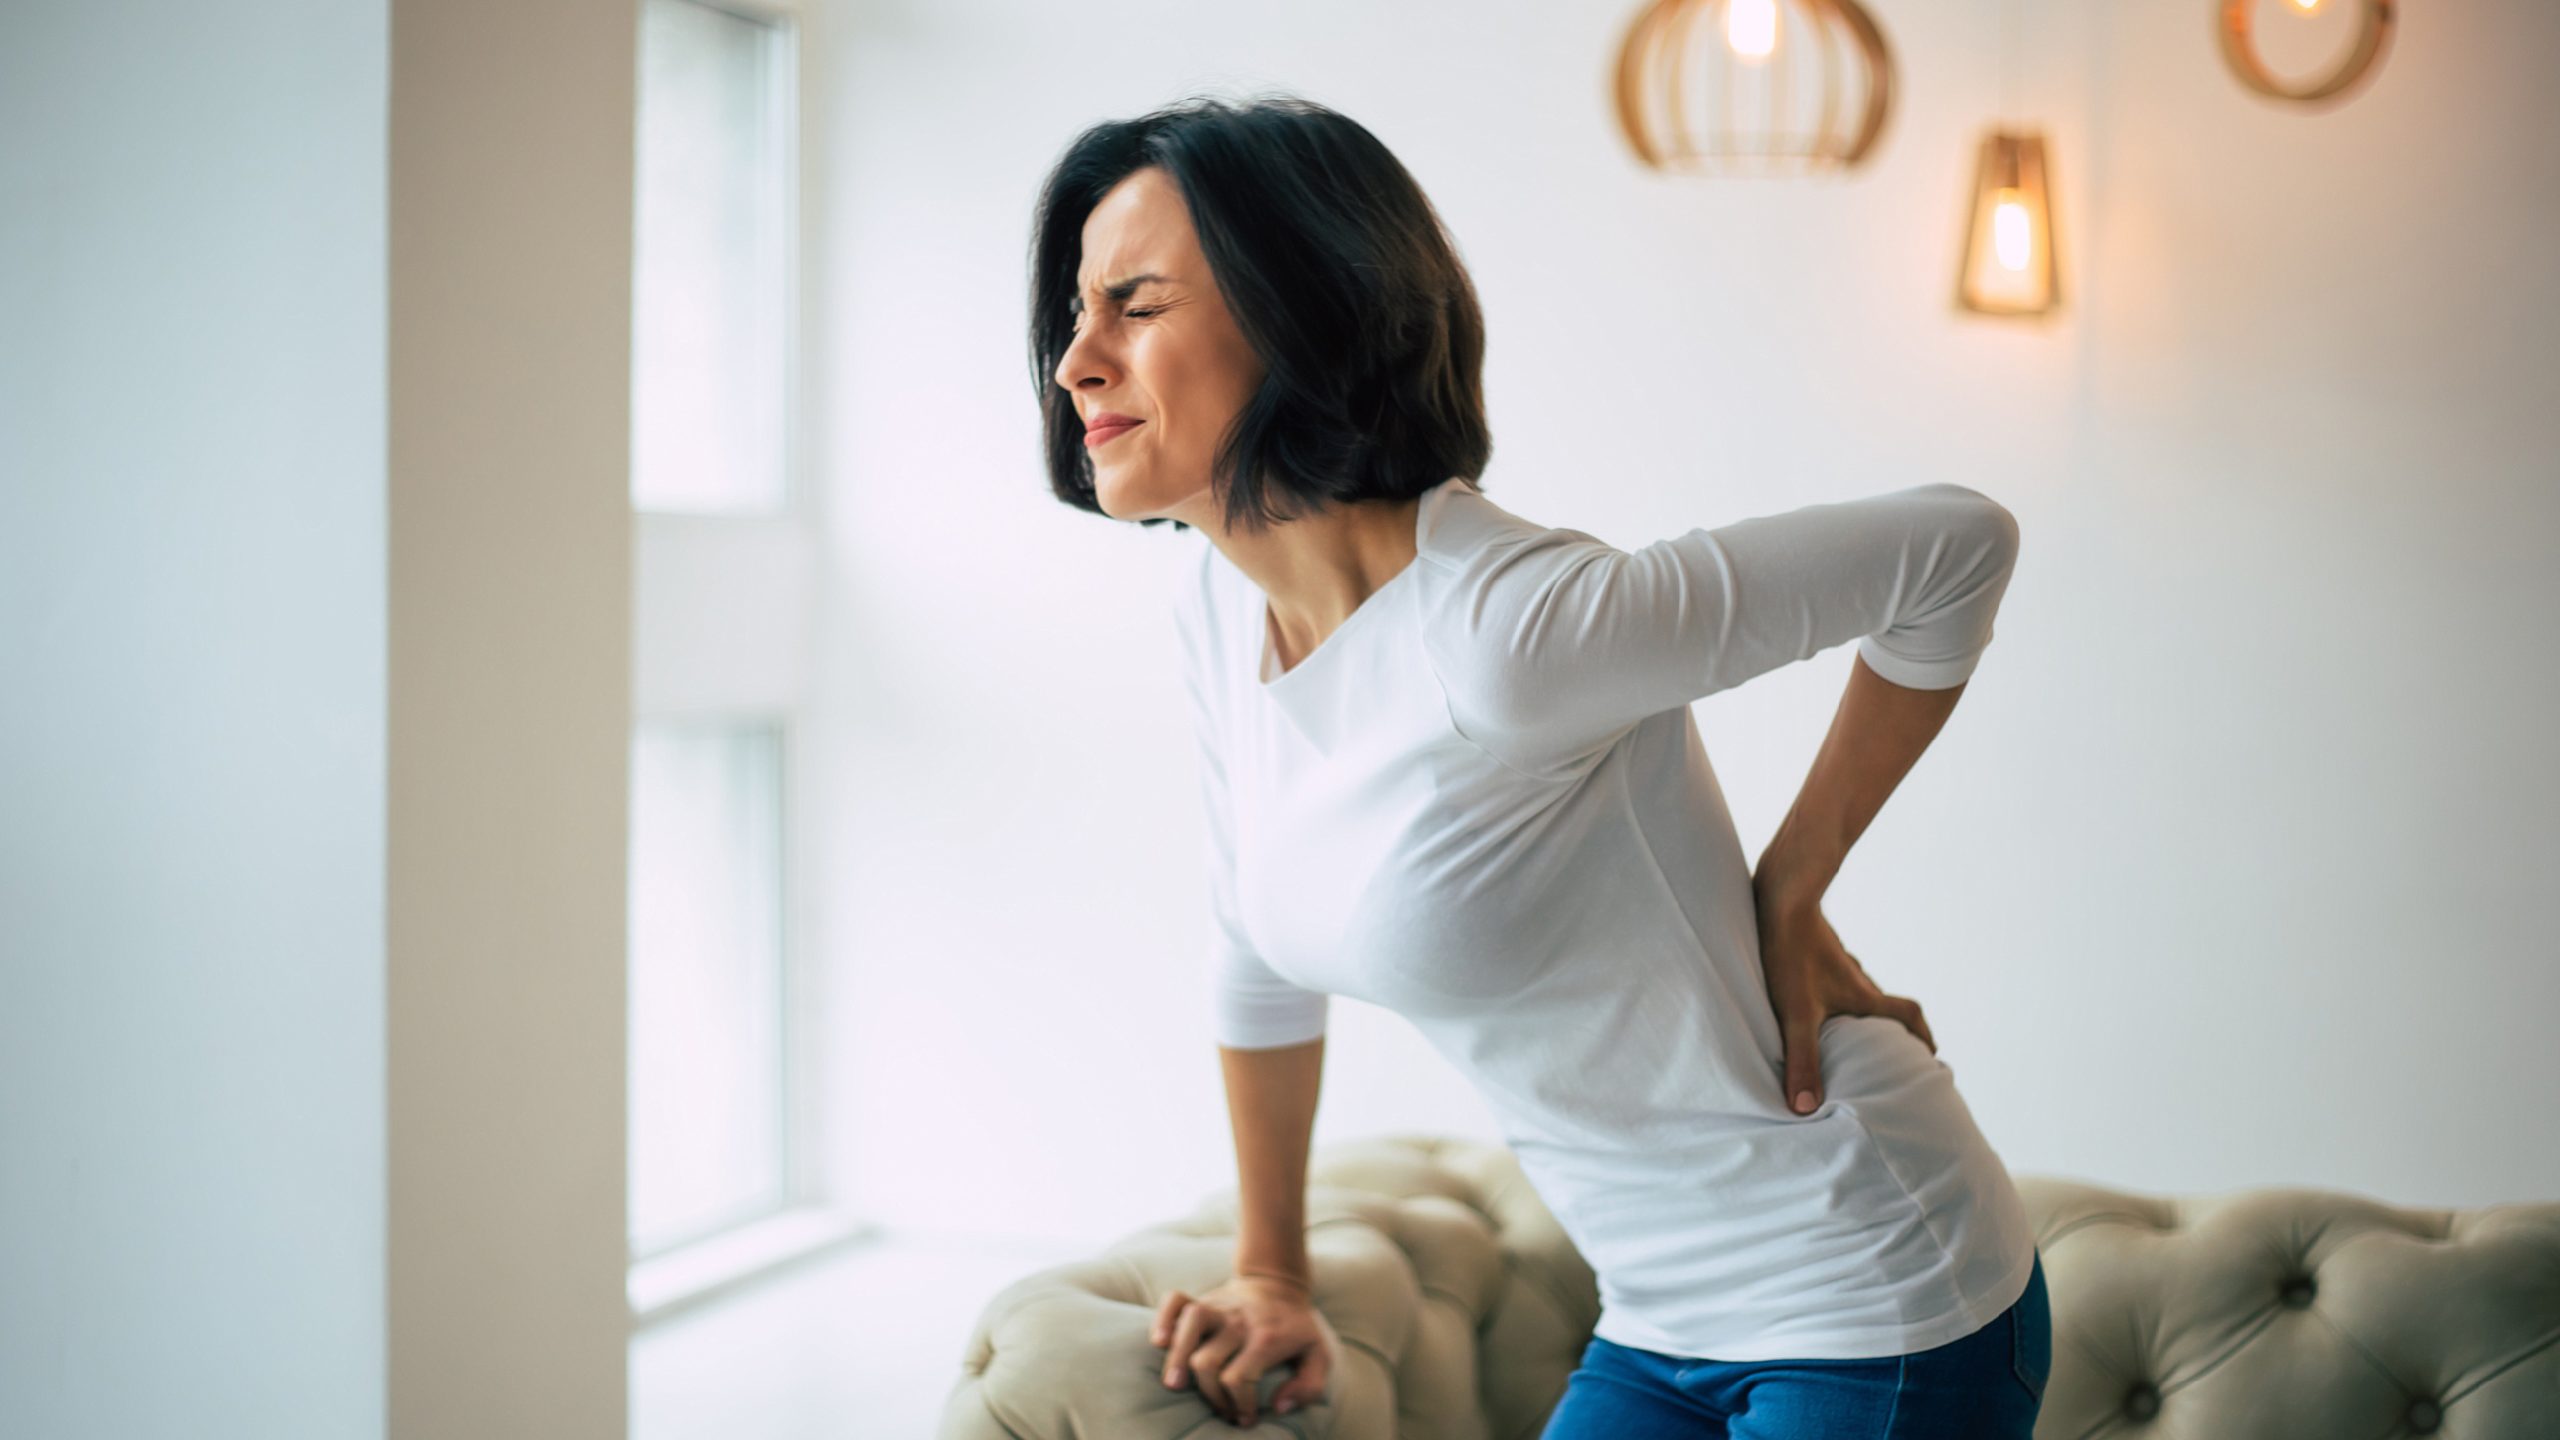 How Do You Stand Up With a Herniated Disc? |  Standing